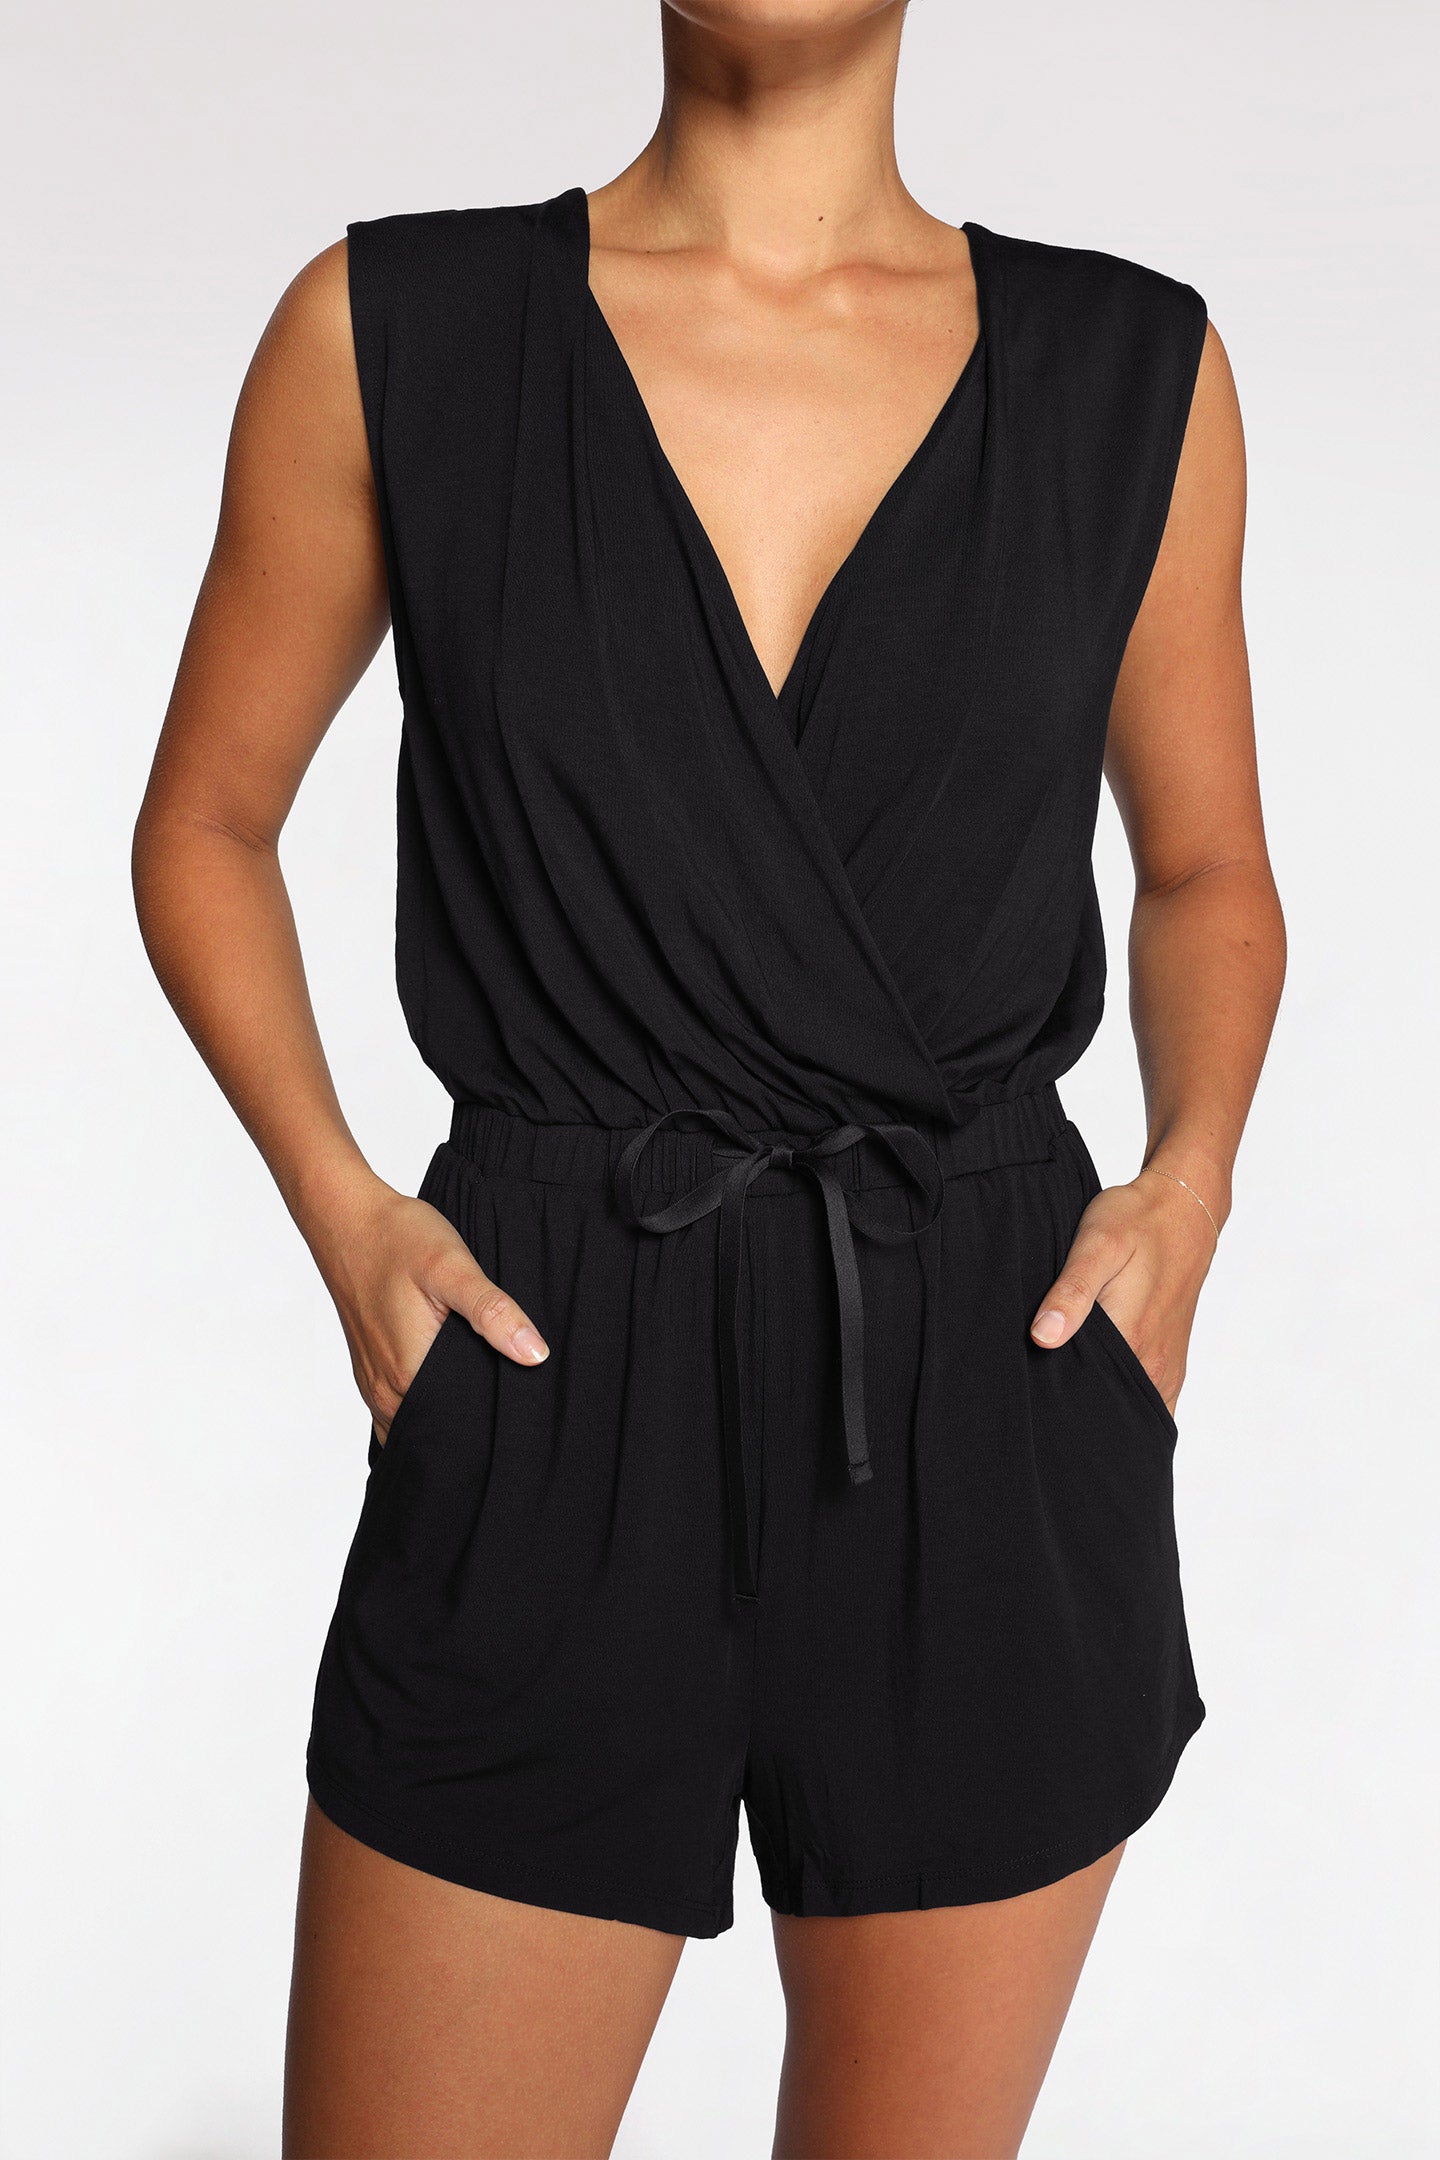 Buy SHORT JUMPSUIT online at Intimo